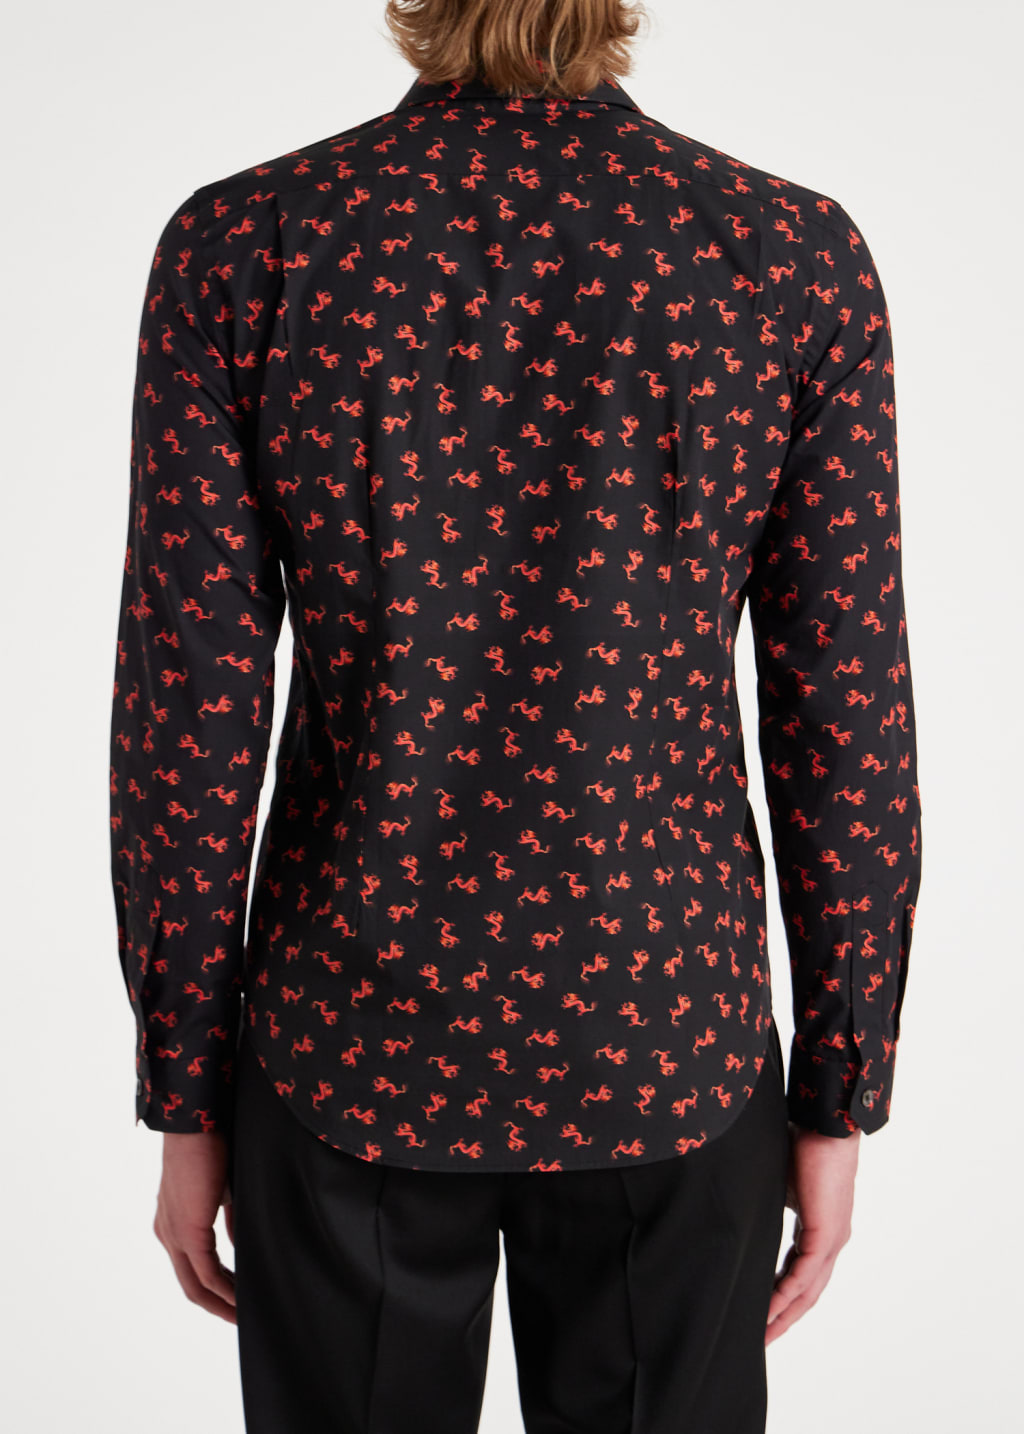 Model View - Super Slim-Fit Black 'Year Of The Dragon' Shirt Paul Smith